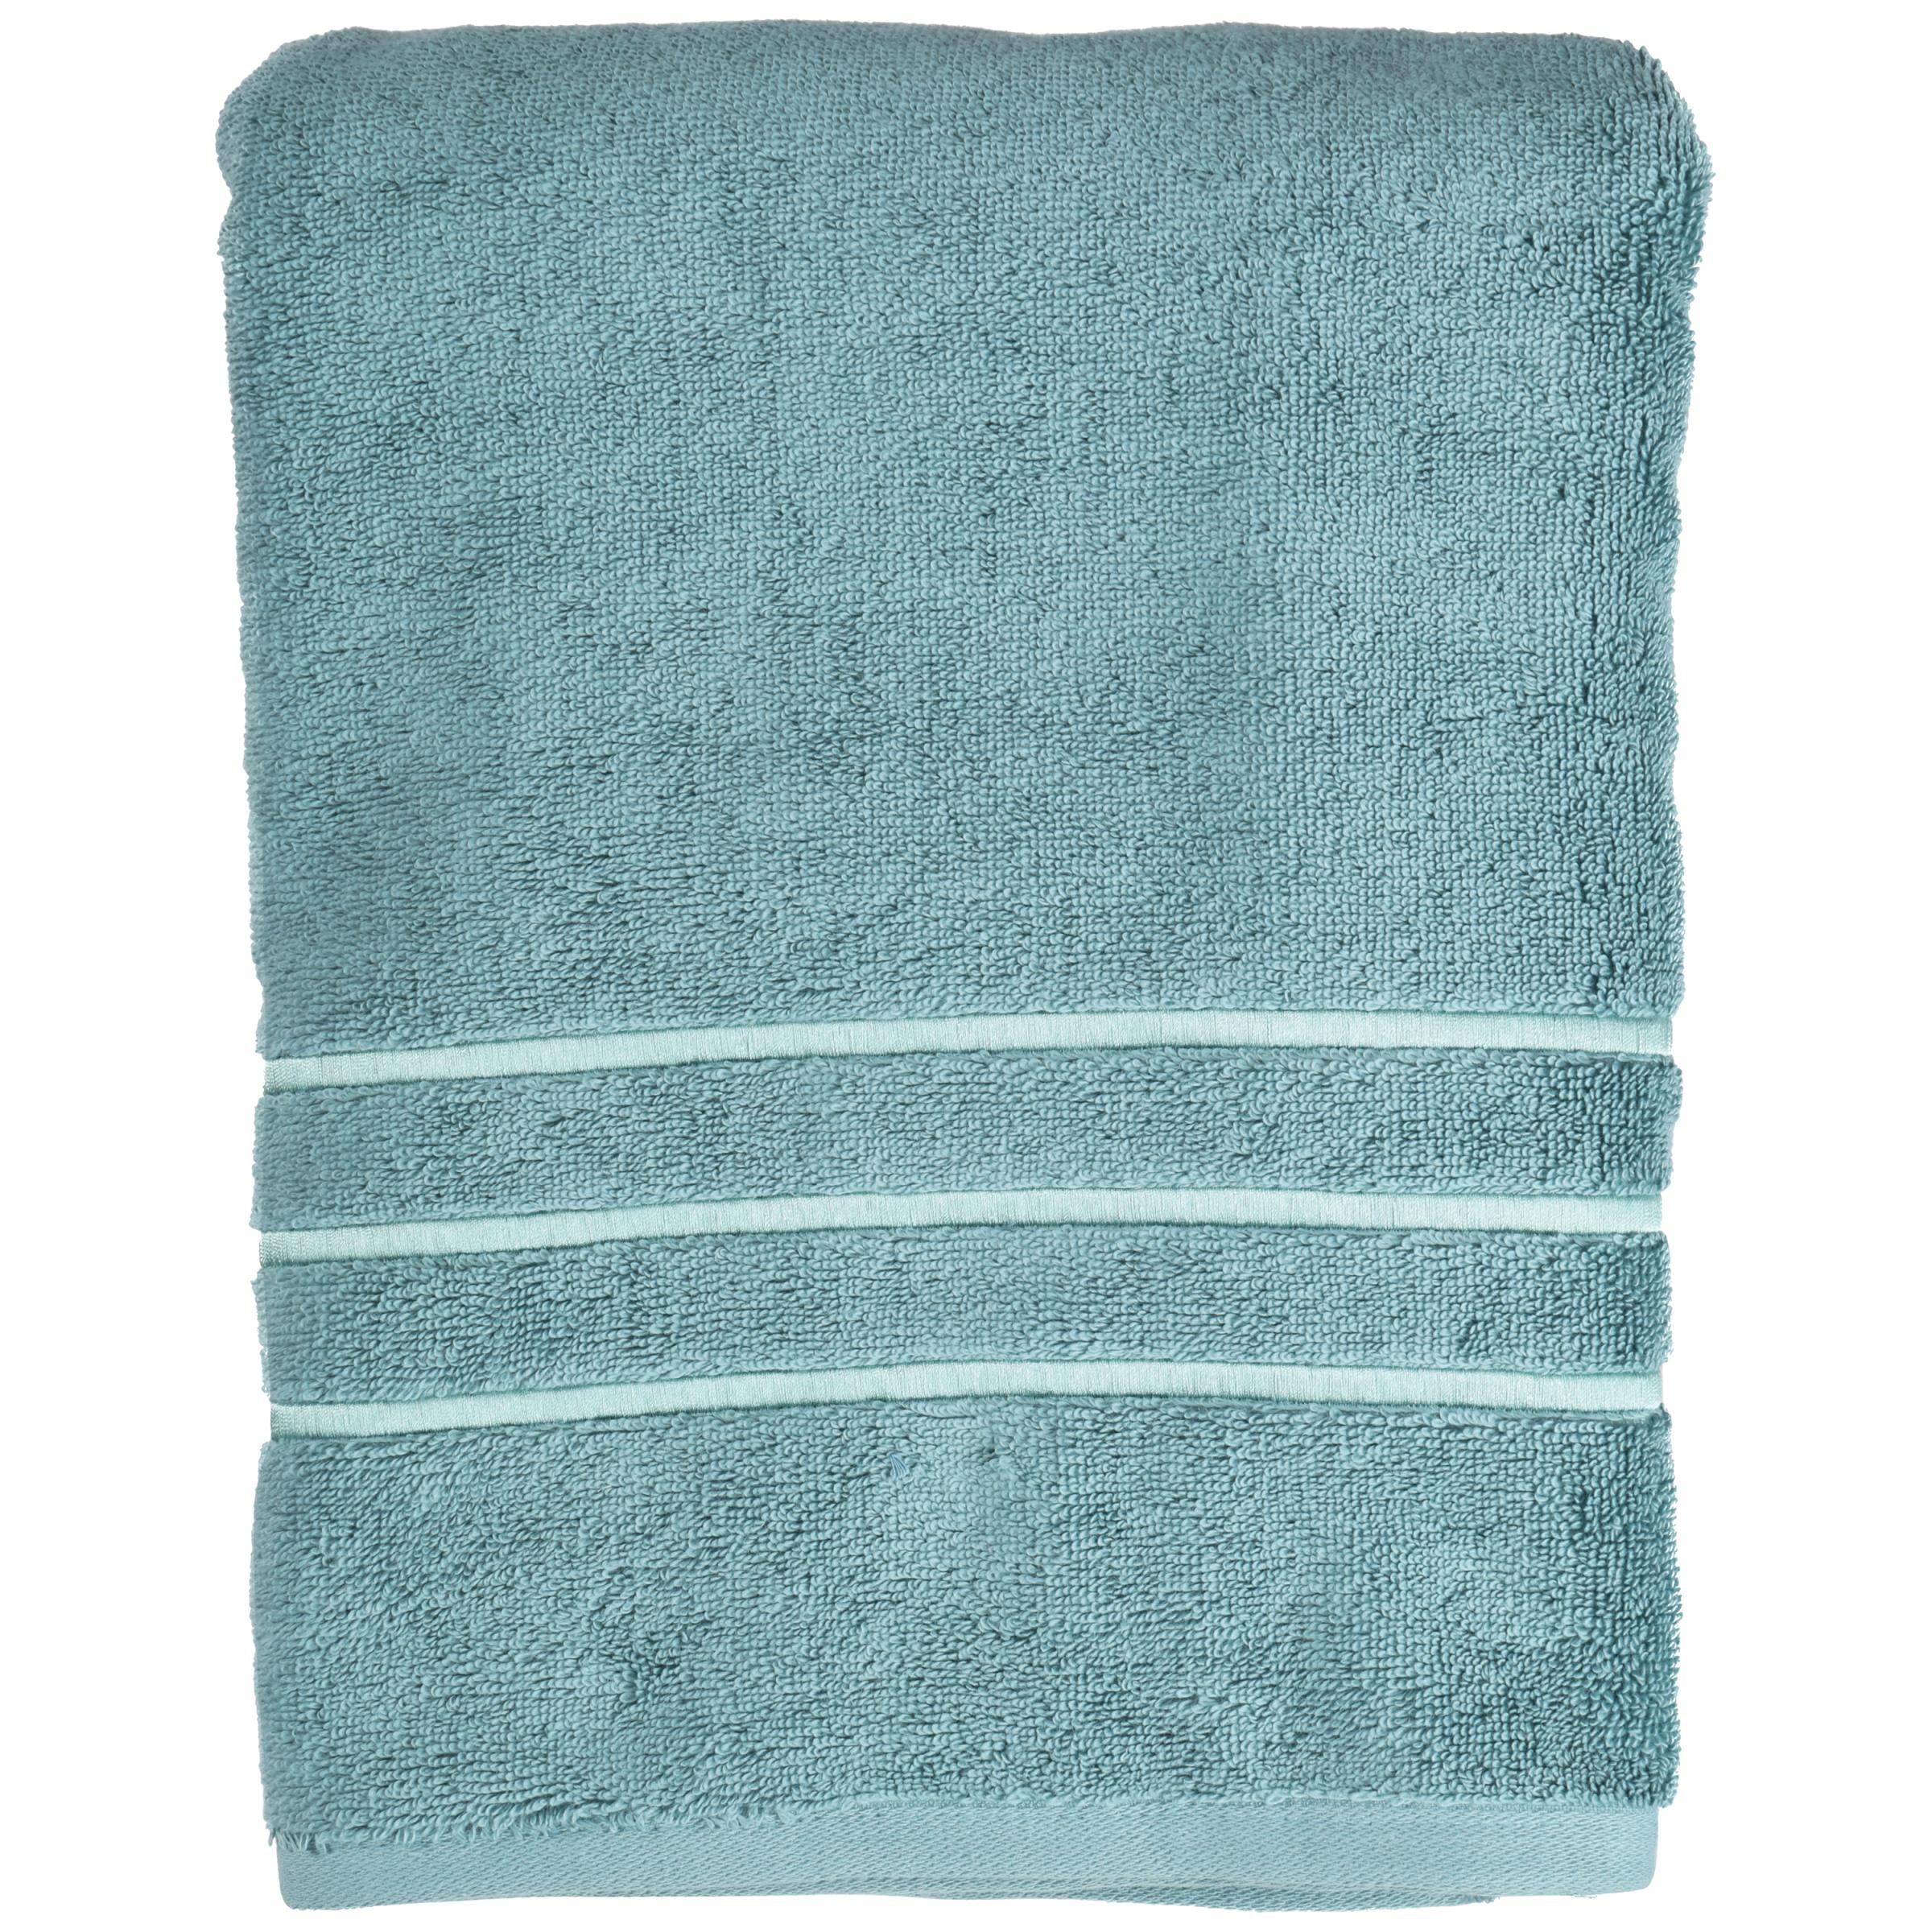 Hotel Style Egyptian Cotton Towel Collection - Walmart.com